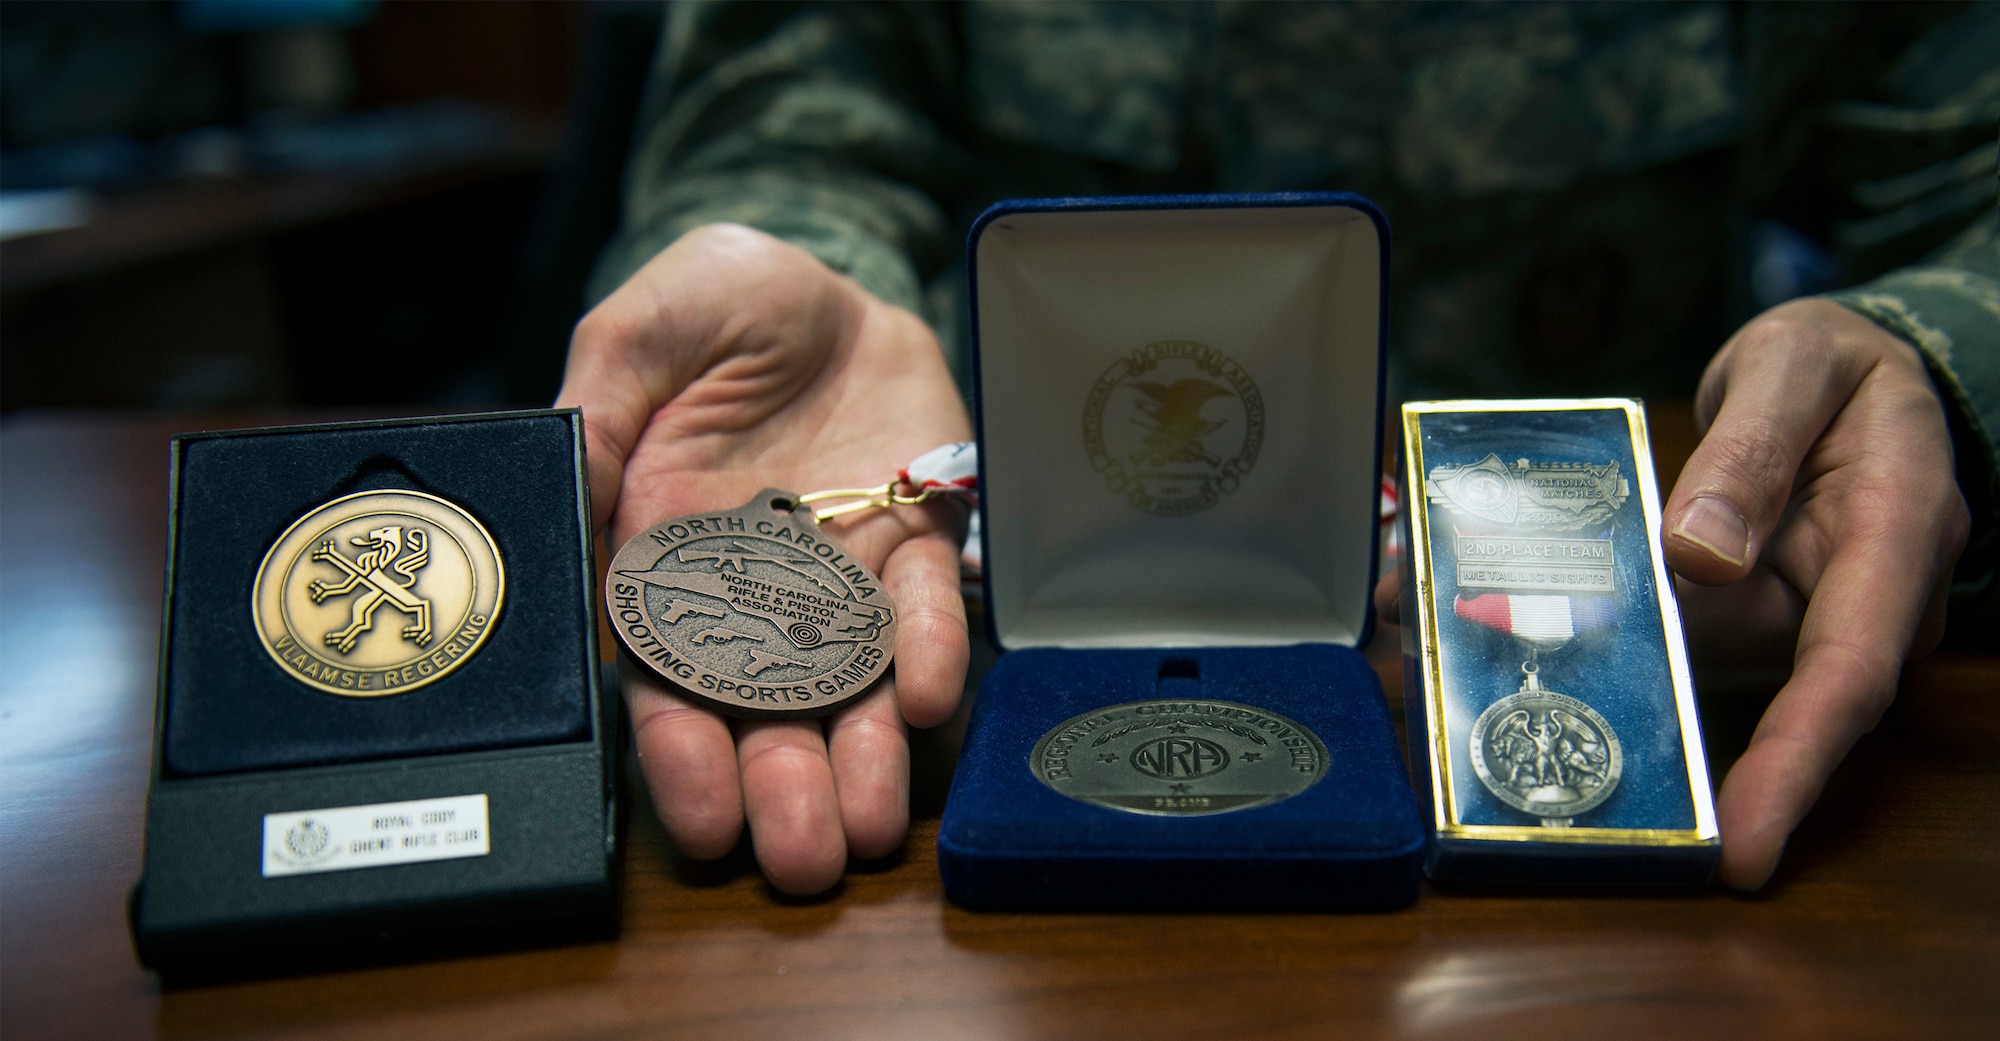 U.S. Air Force Maj. Robert Davis, 93d Air Ground Operations Wing director of complaints resolution, poses with his competitive shooting awards and medals July 1, 2016, at Moody Air Force Base, Ga. He considers winning the 2005 Master of Flanders his most prestigious accomplishment in which he became the first American to garner first place honors in the Belgian competitive shooting series. (U.S. Air Force photo by Airman 1st Class Greg Nash/Released) 